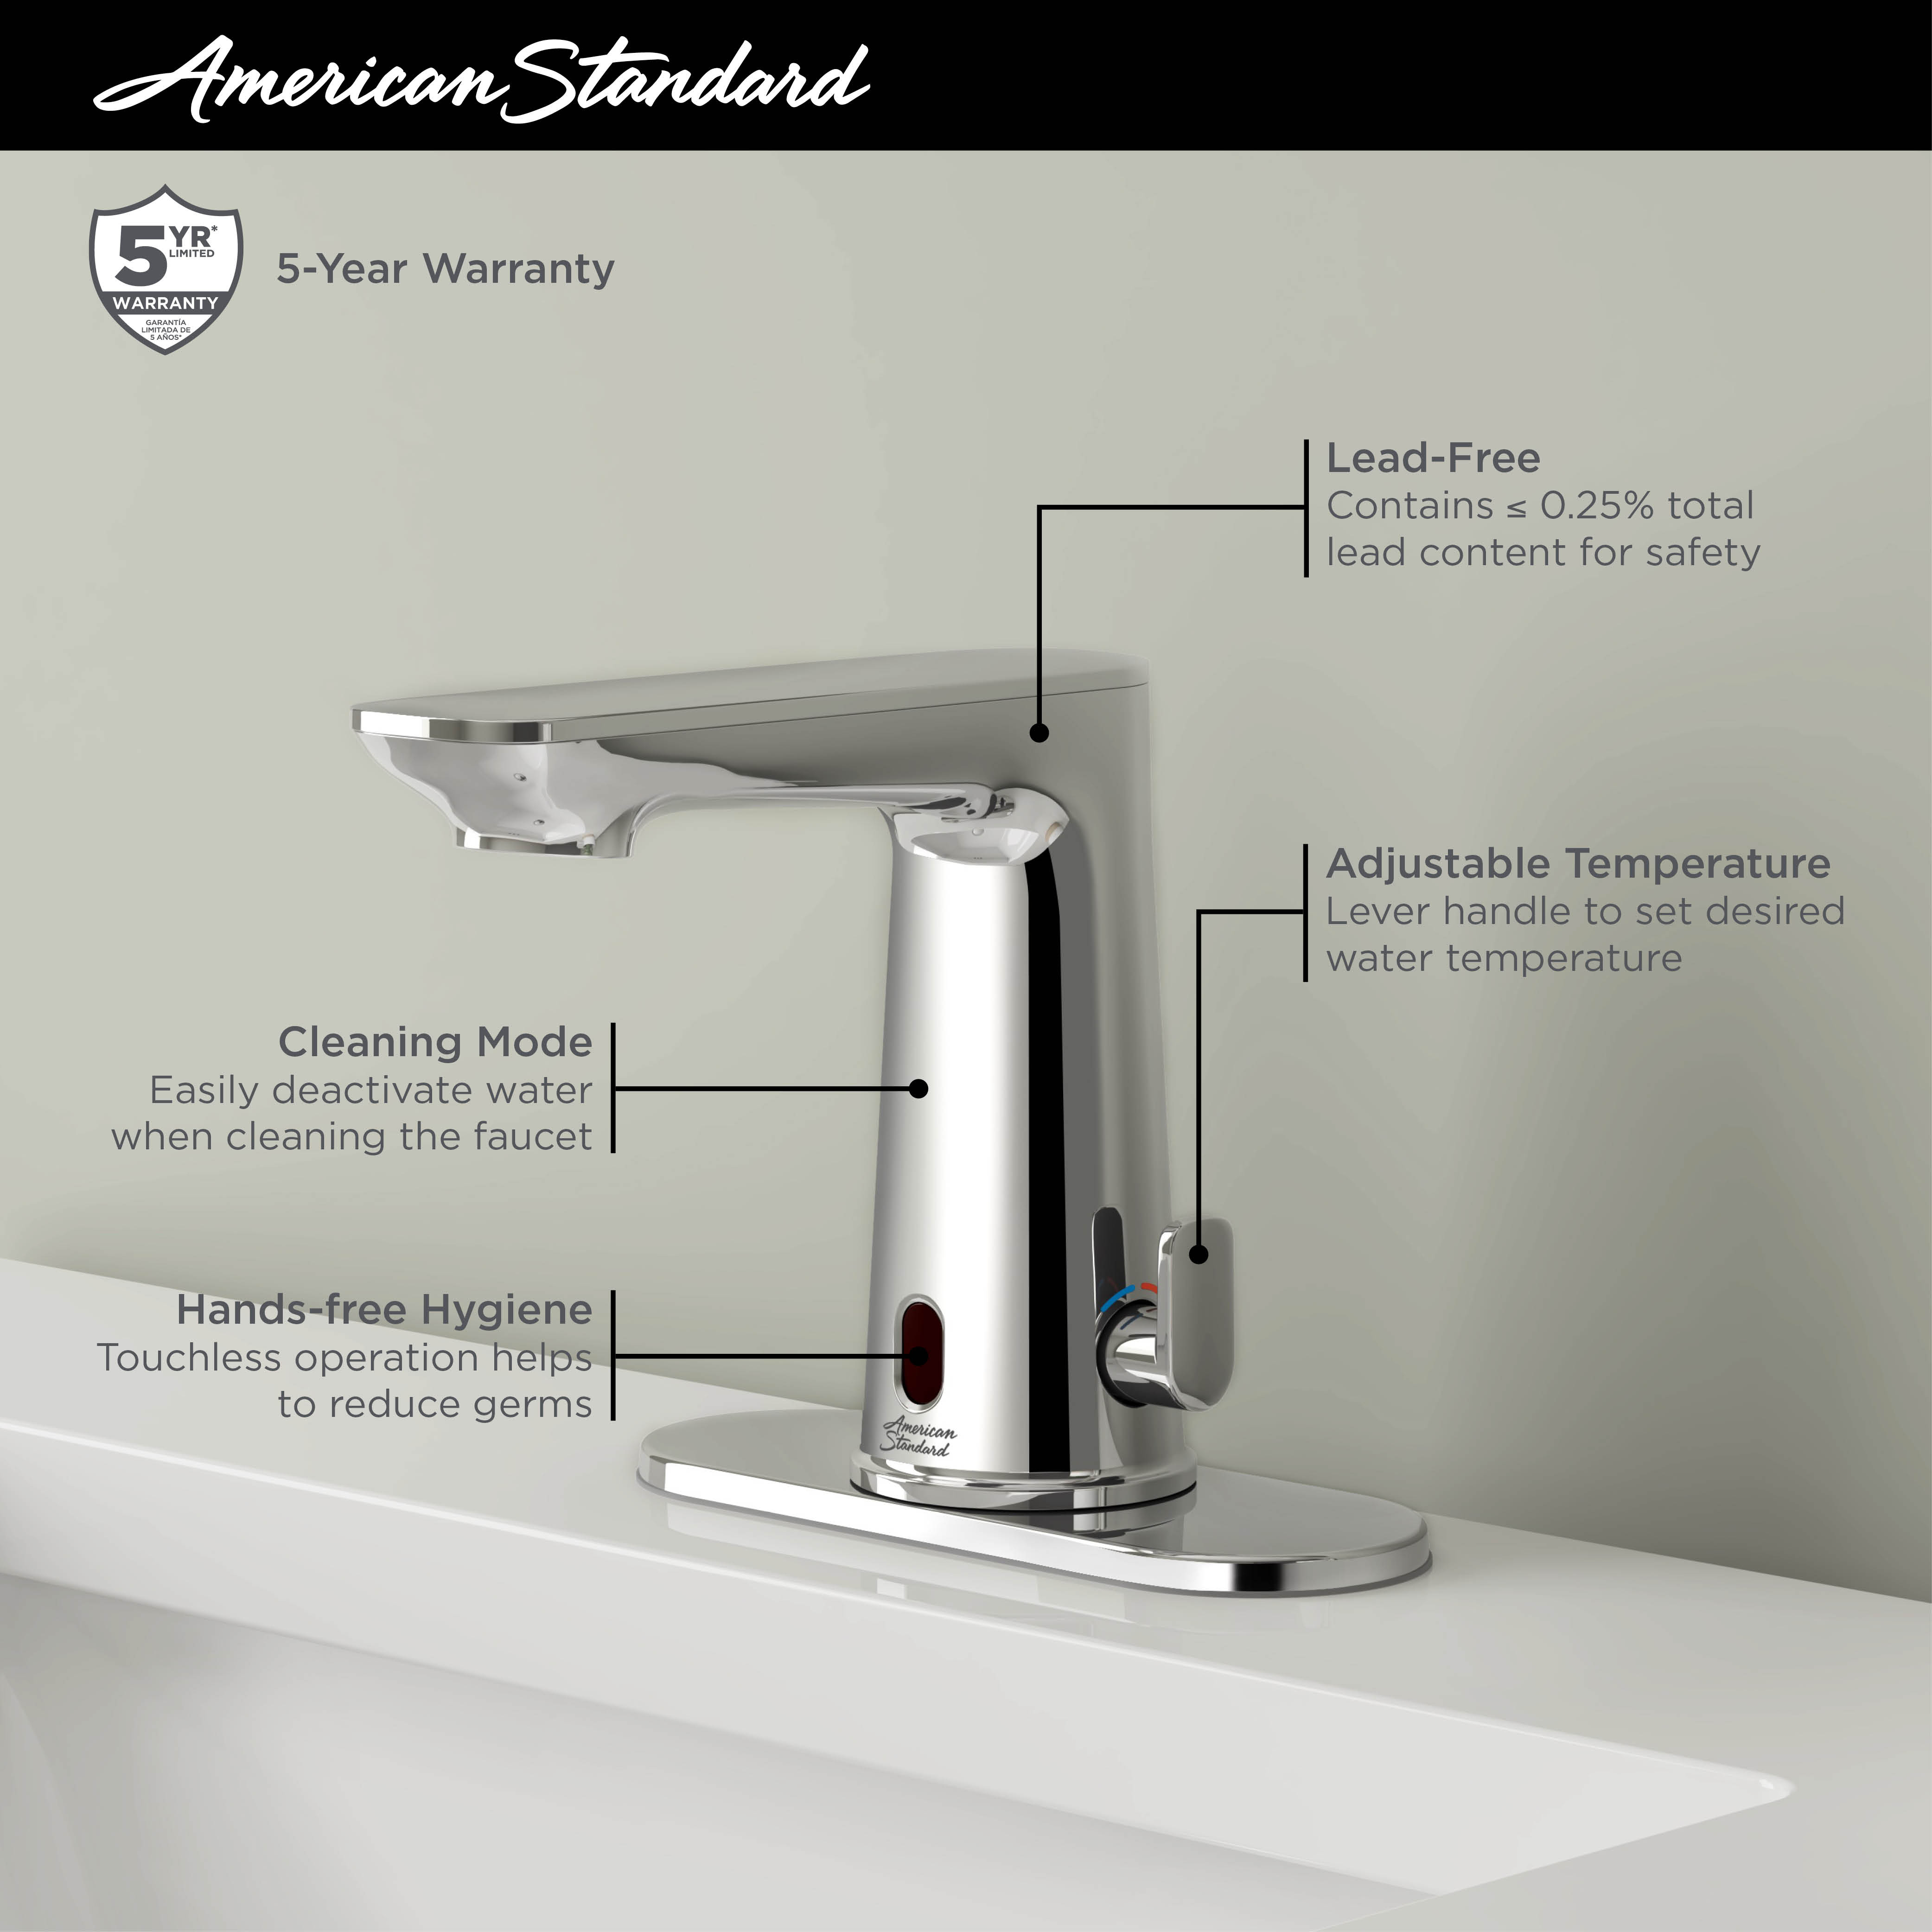 Clean IR Touchless Bathroom Faucet With Battery 